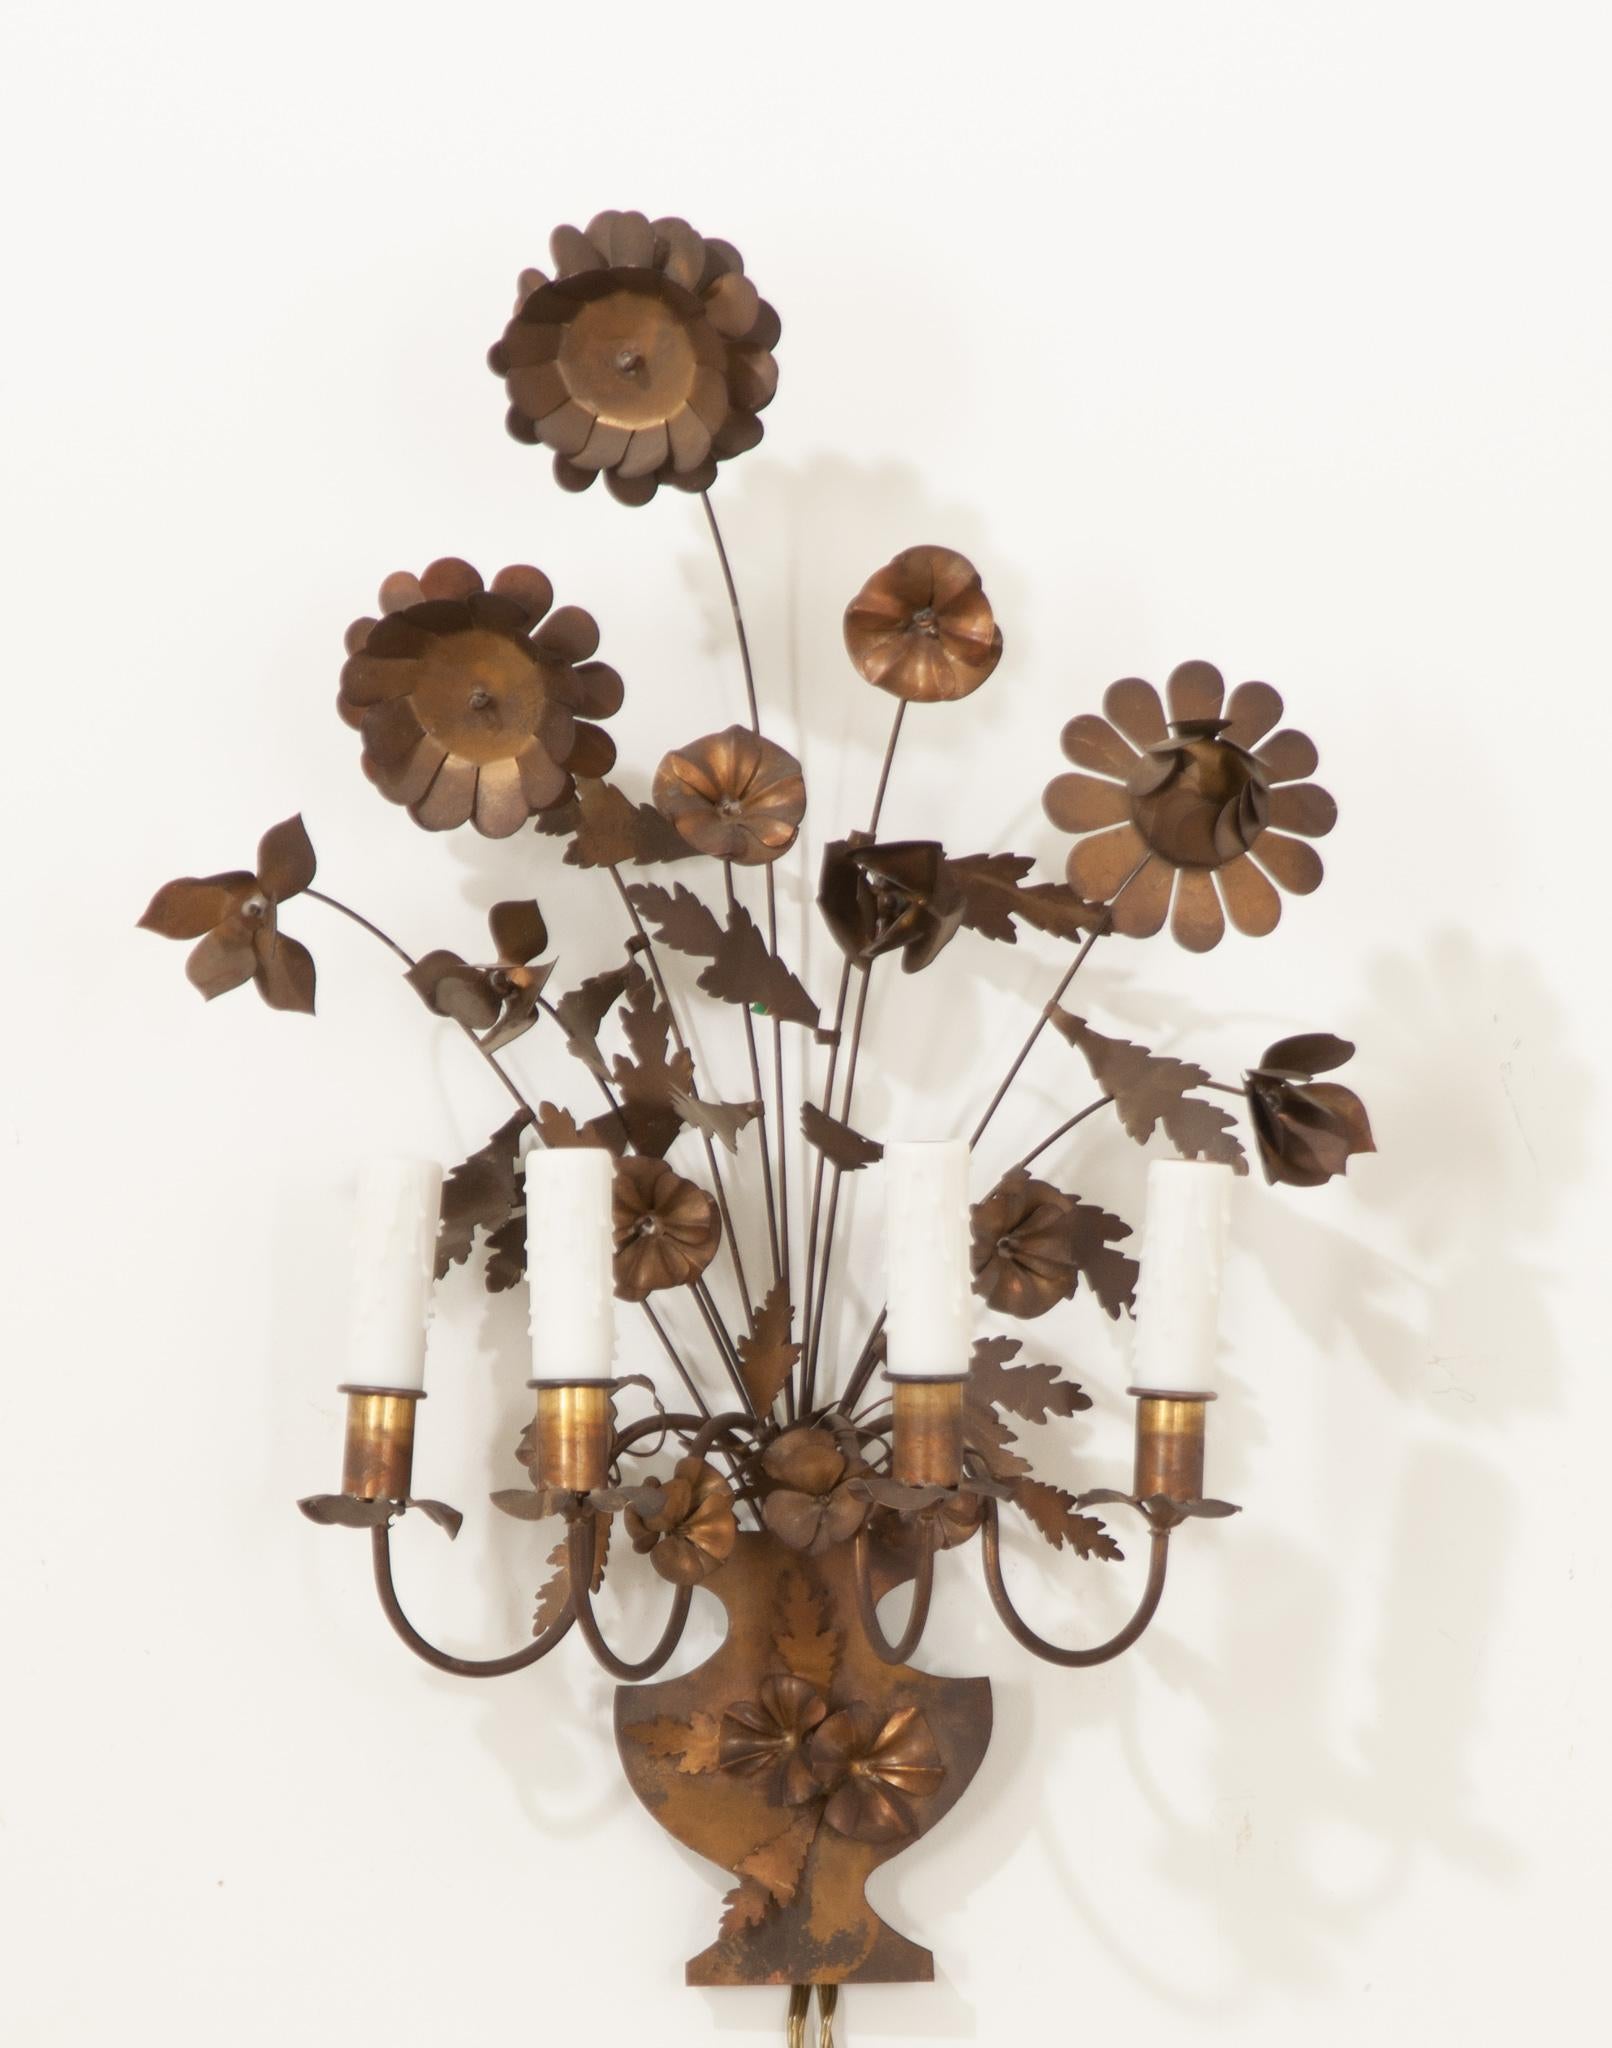 This whimsical vintage French sconce is the perfect way to add an organic element to your space. Crafted from thin brass and formed into flowers, the lightweight medium allows for some movement of the tall stems. This single sconce features four